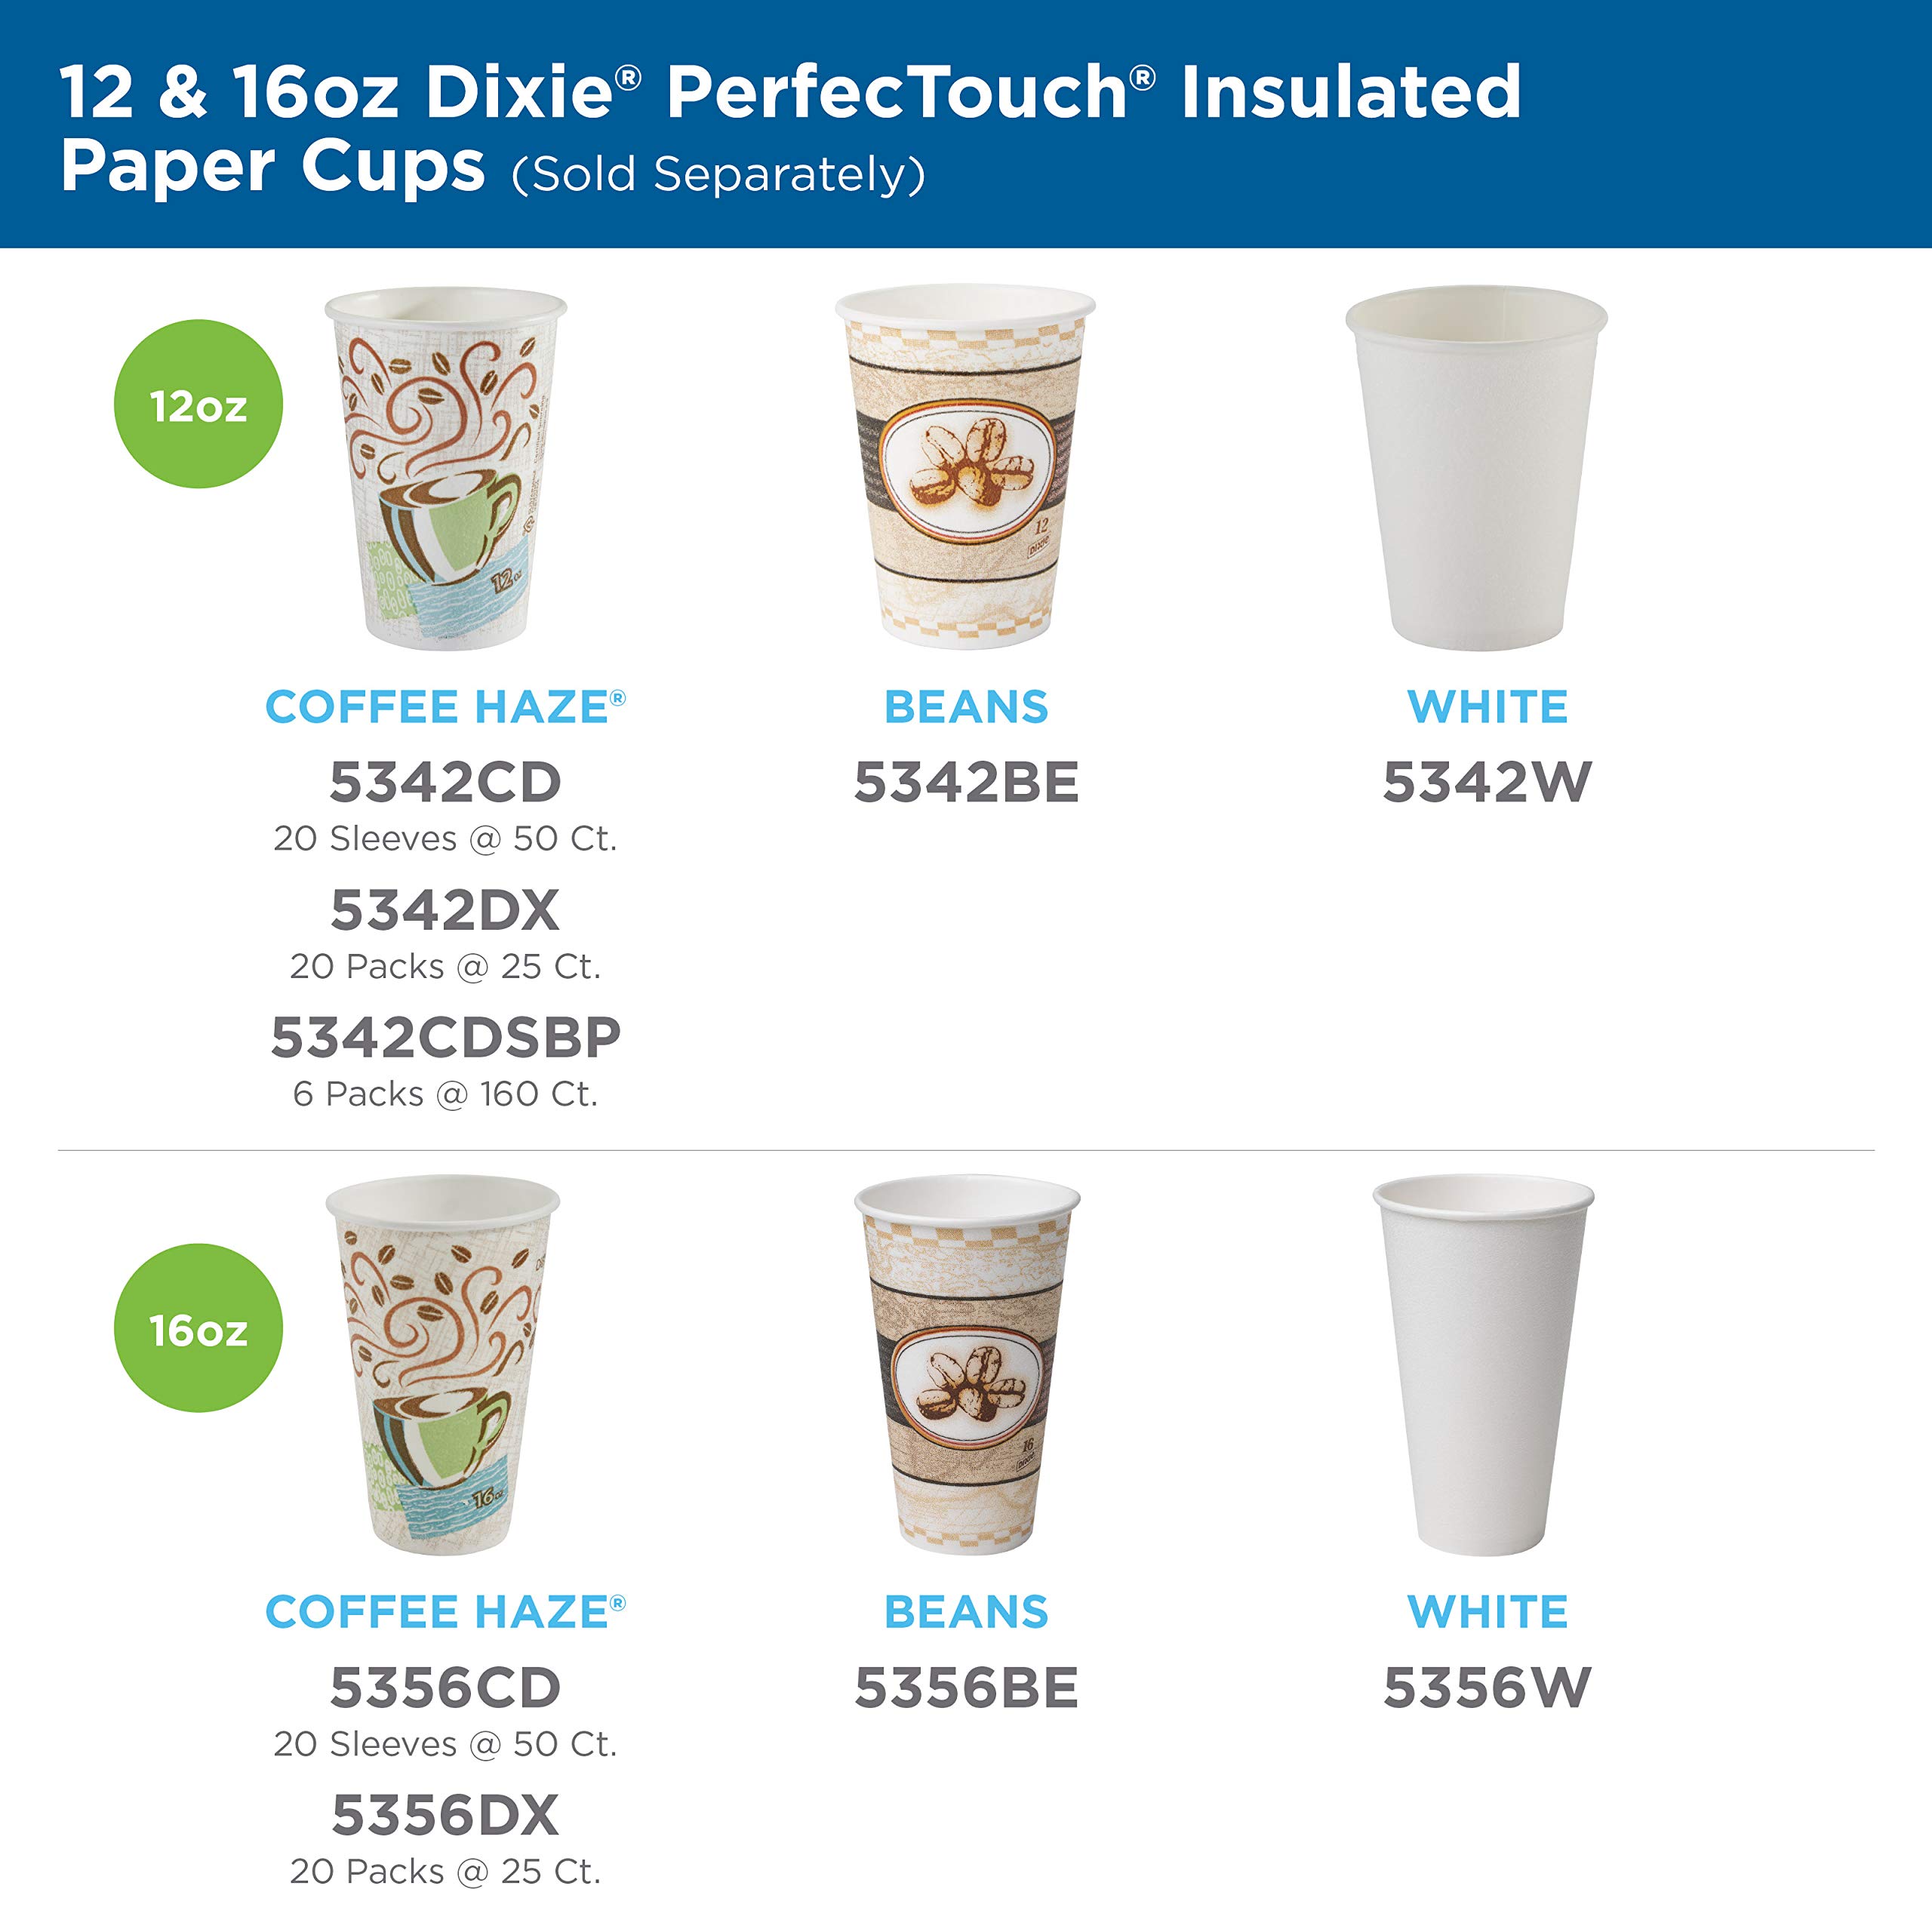 Dixie PerfecTouch 12 Oz Insulated Paper Hot Coffee Cup by GP PRO (Georgia-Pacific); Coffee Haze; 5342DX; 500 Count (25 Cups Per Sleeve; 20 Sleeves Per Case)